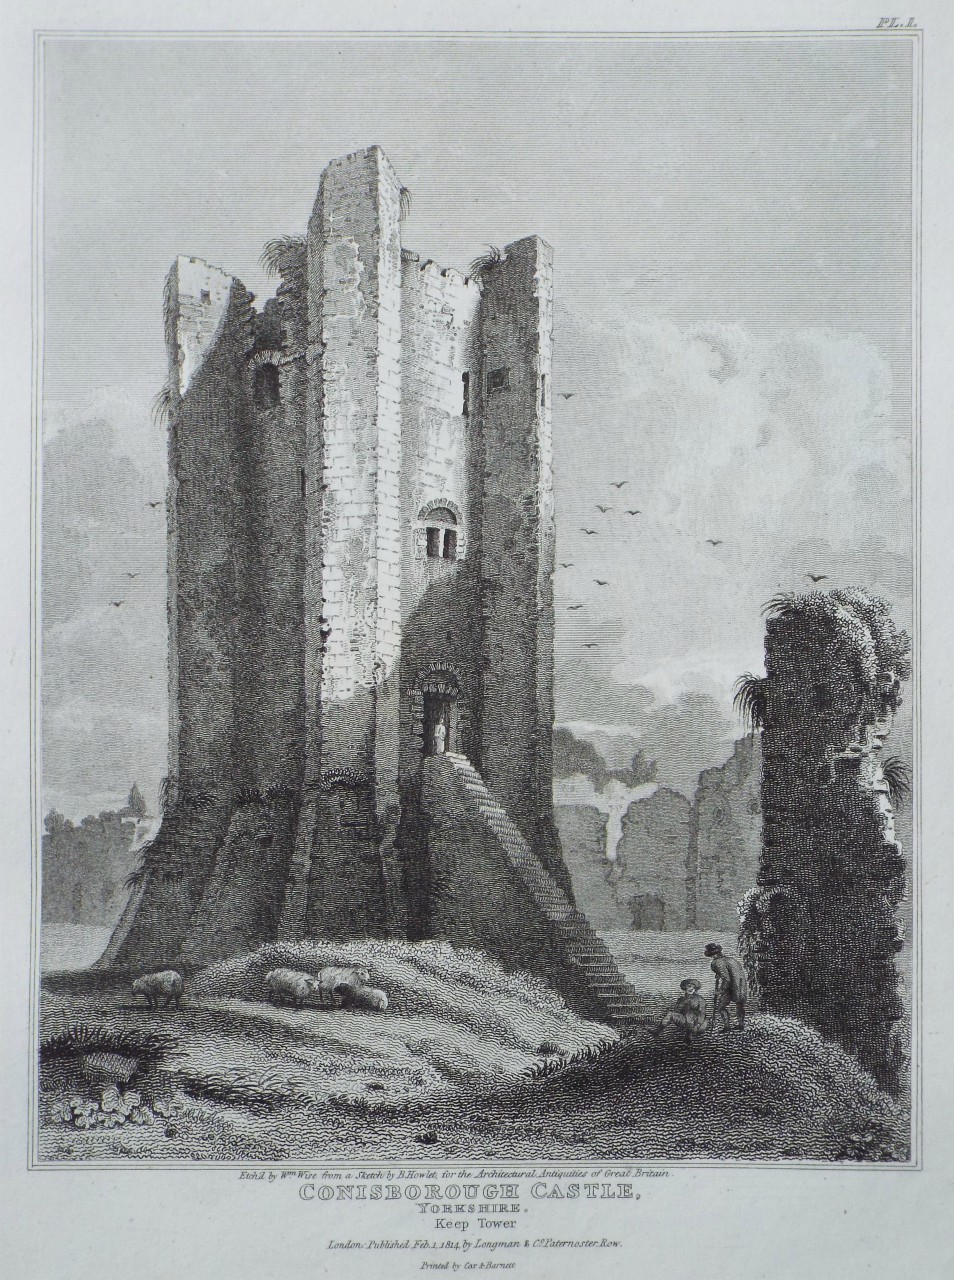 Print - Conisbrough Castle, Yorkshire. Keep Tower - Wise